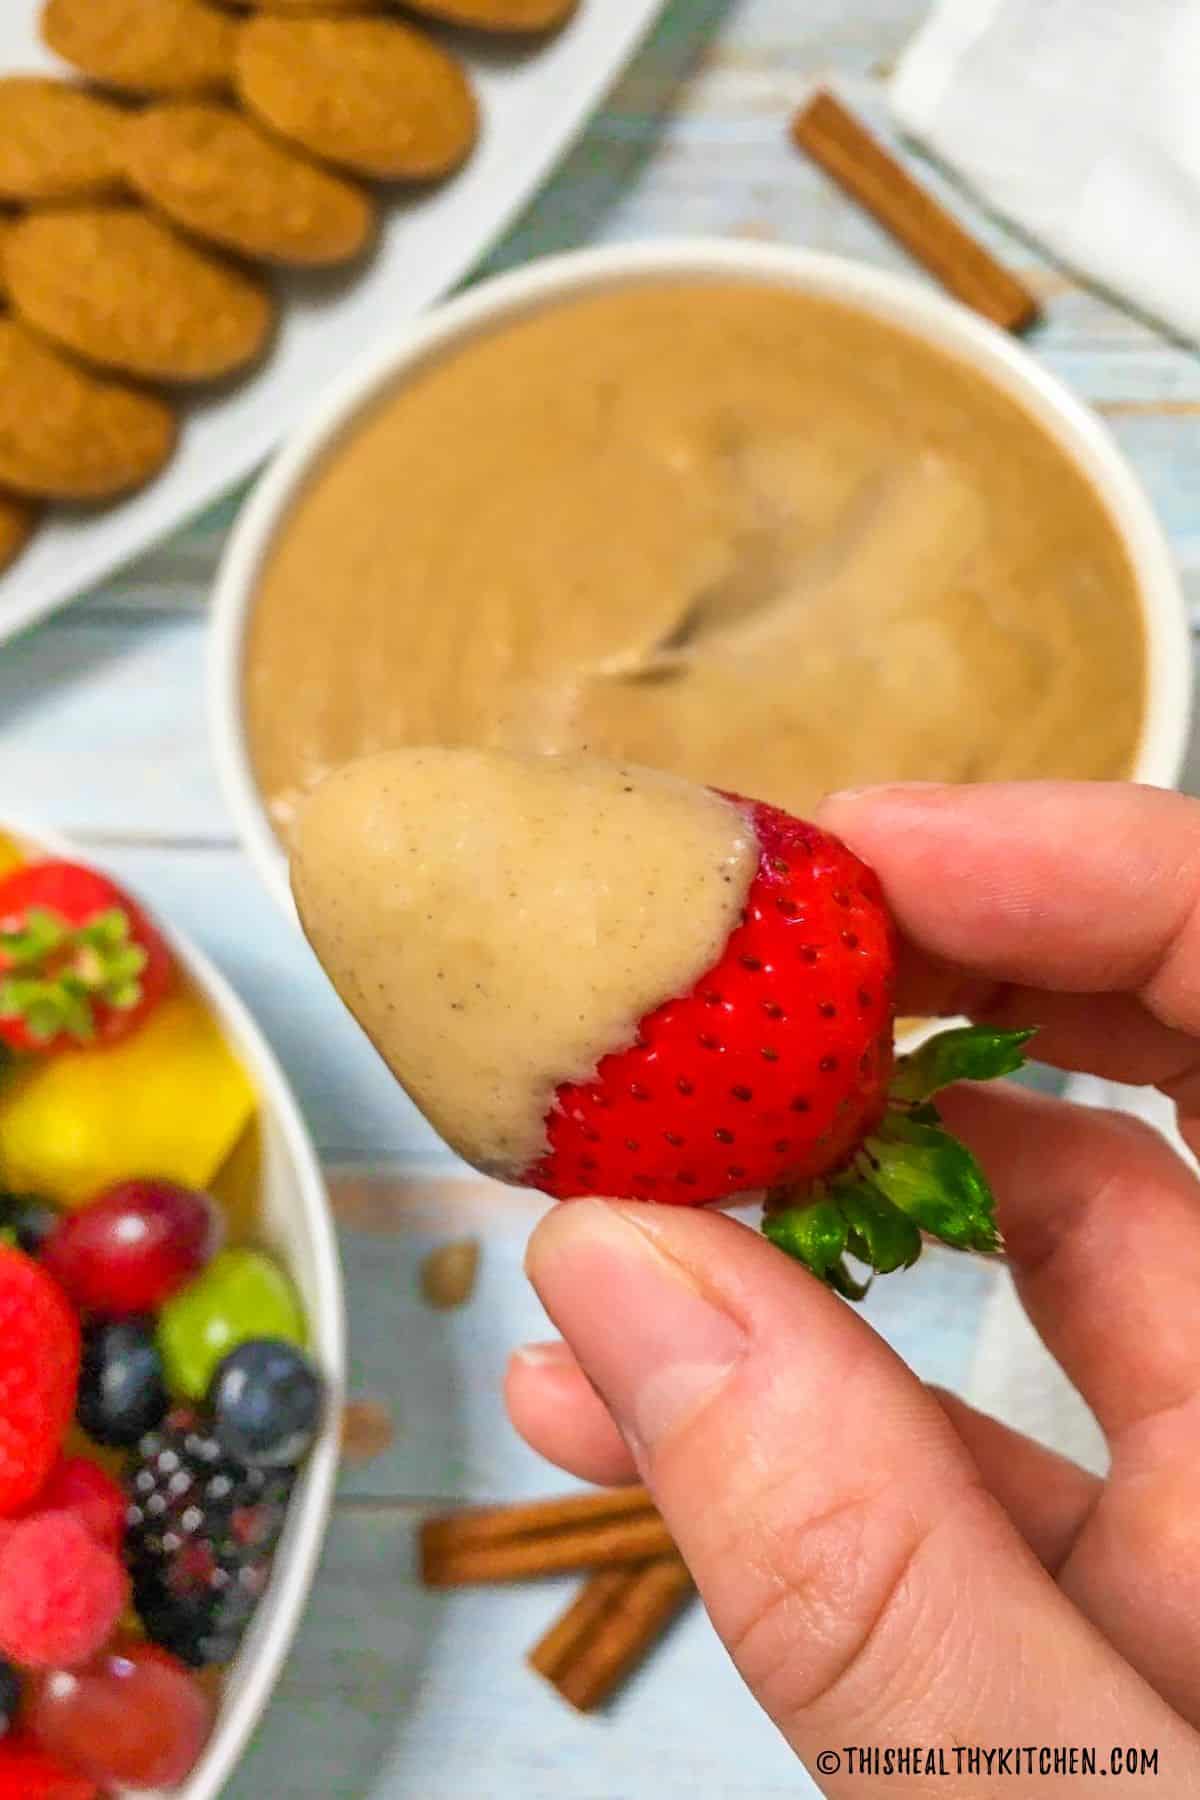 Strawberry being held over bowl of sweet dip that has been dunked inside it.